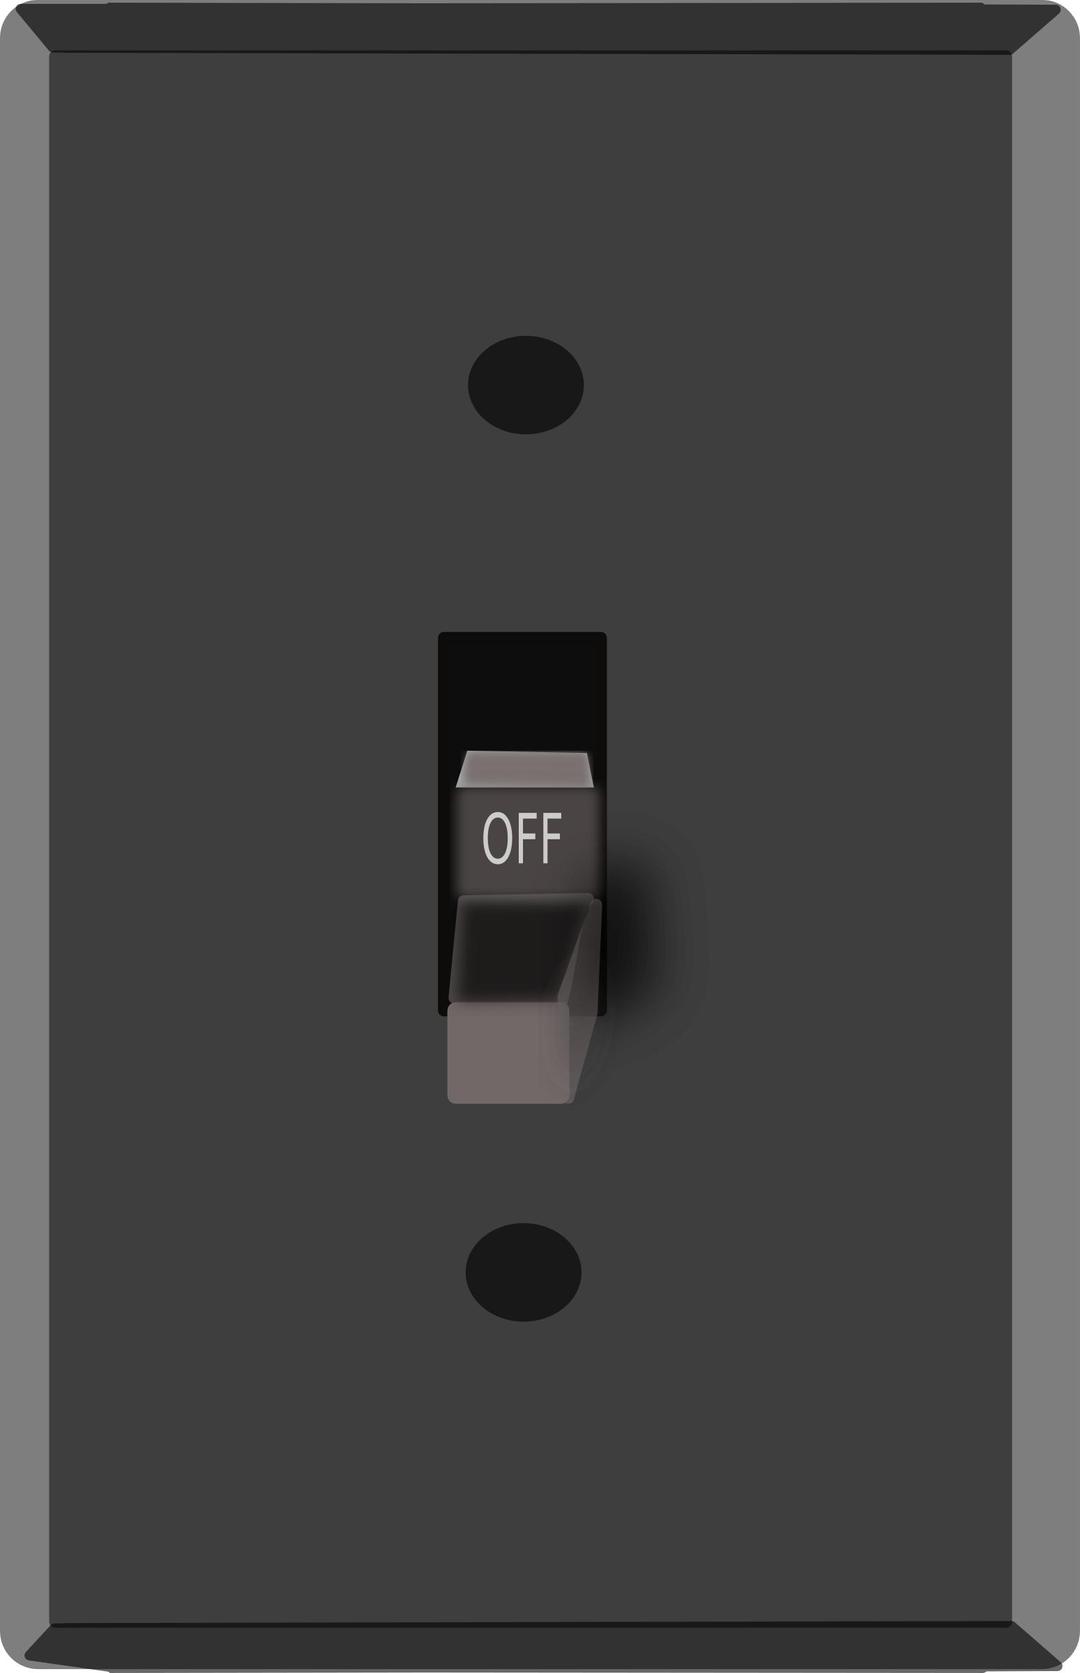 Light switch off png transparent